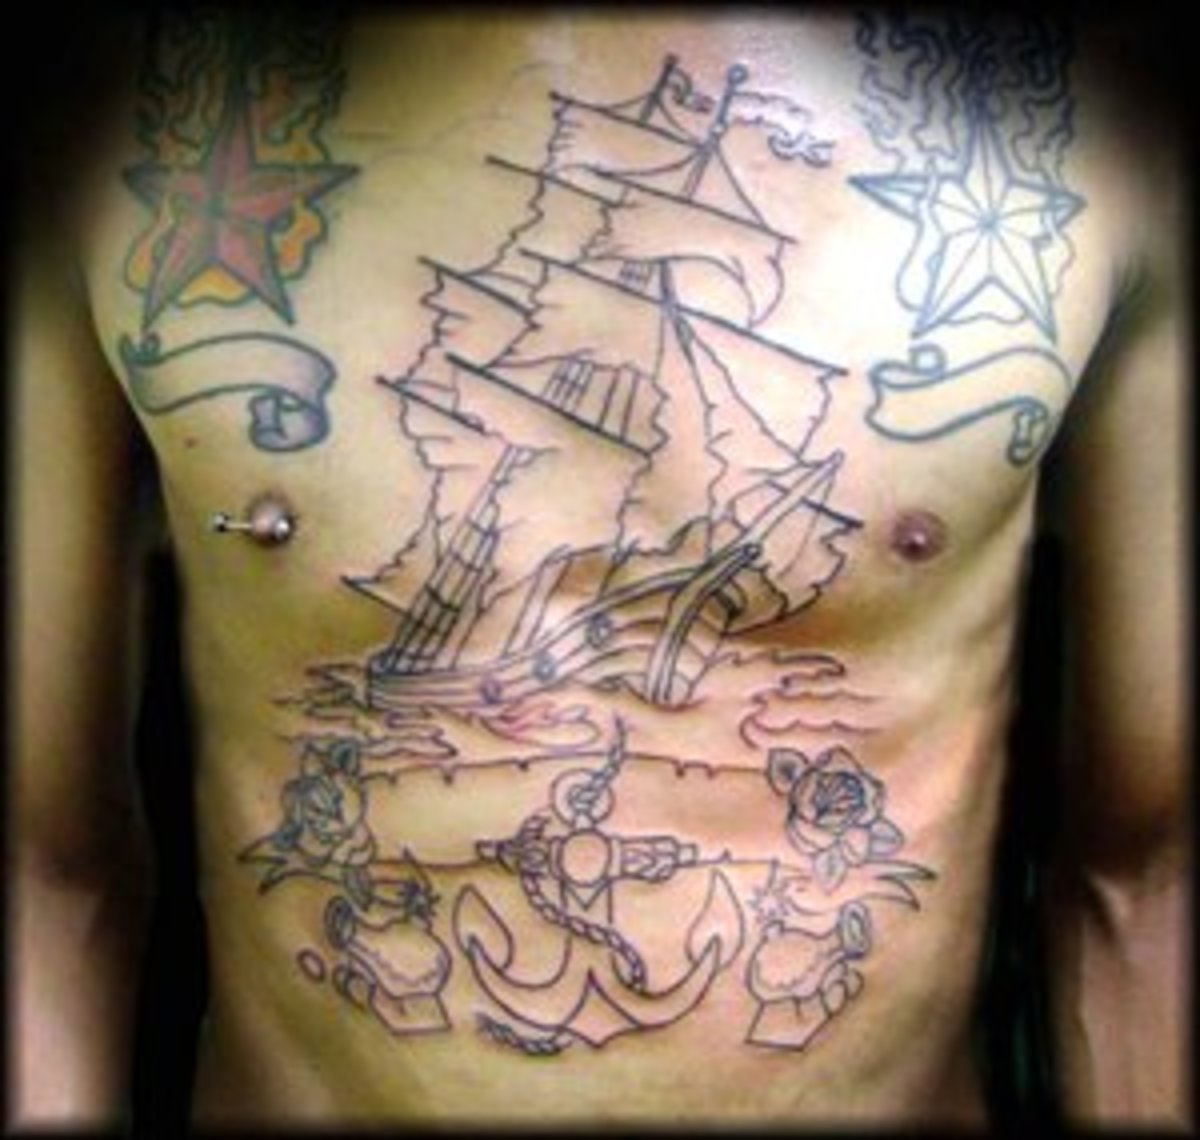 Outline of a Pirate Ship Tattoo on the Chest and Stomach